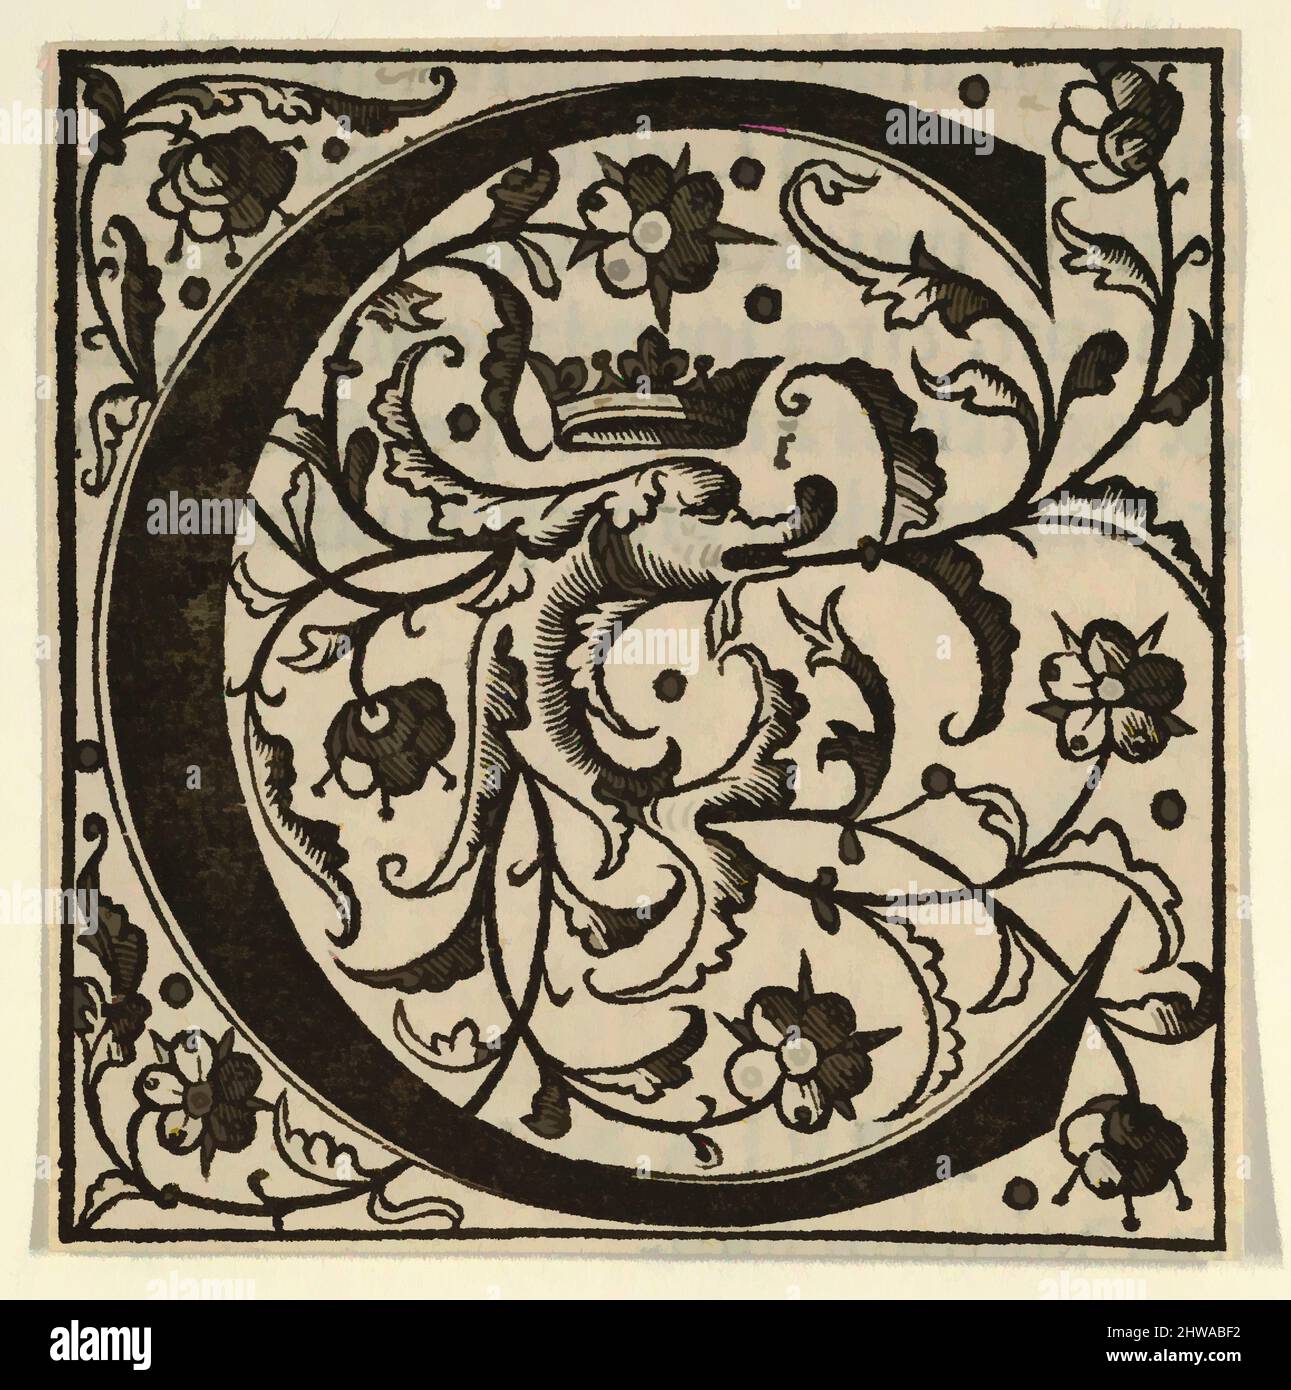 Art inspired by Drawings and Prints, Print, Initial letter C with dolphin and crown, mid-16th century, 1532, 1554, Woodcut, Classic works modernized by Artotop with a splash of modernity. Shapes, color and value, eye-catching visual impact on art. Emotions through freedom of artworks in a contemporary way. A timeless message pursuing a wildly creative new direction. Artists turning to the digital medium and creating the Artotop NFT Stock Photo